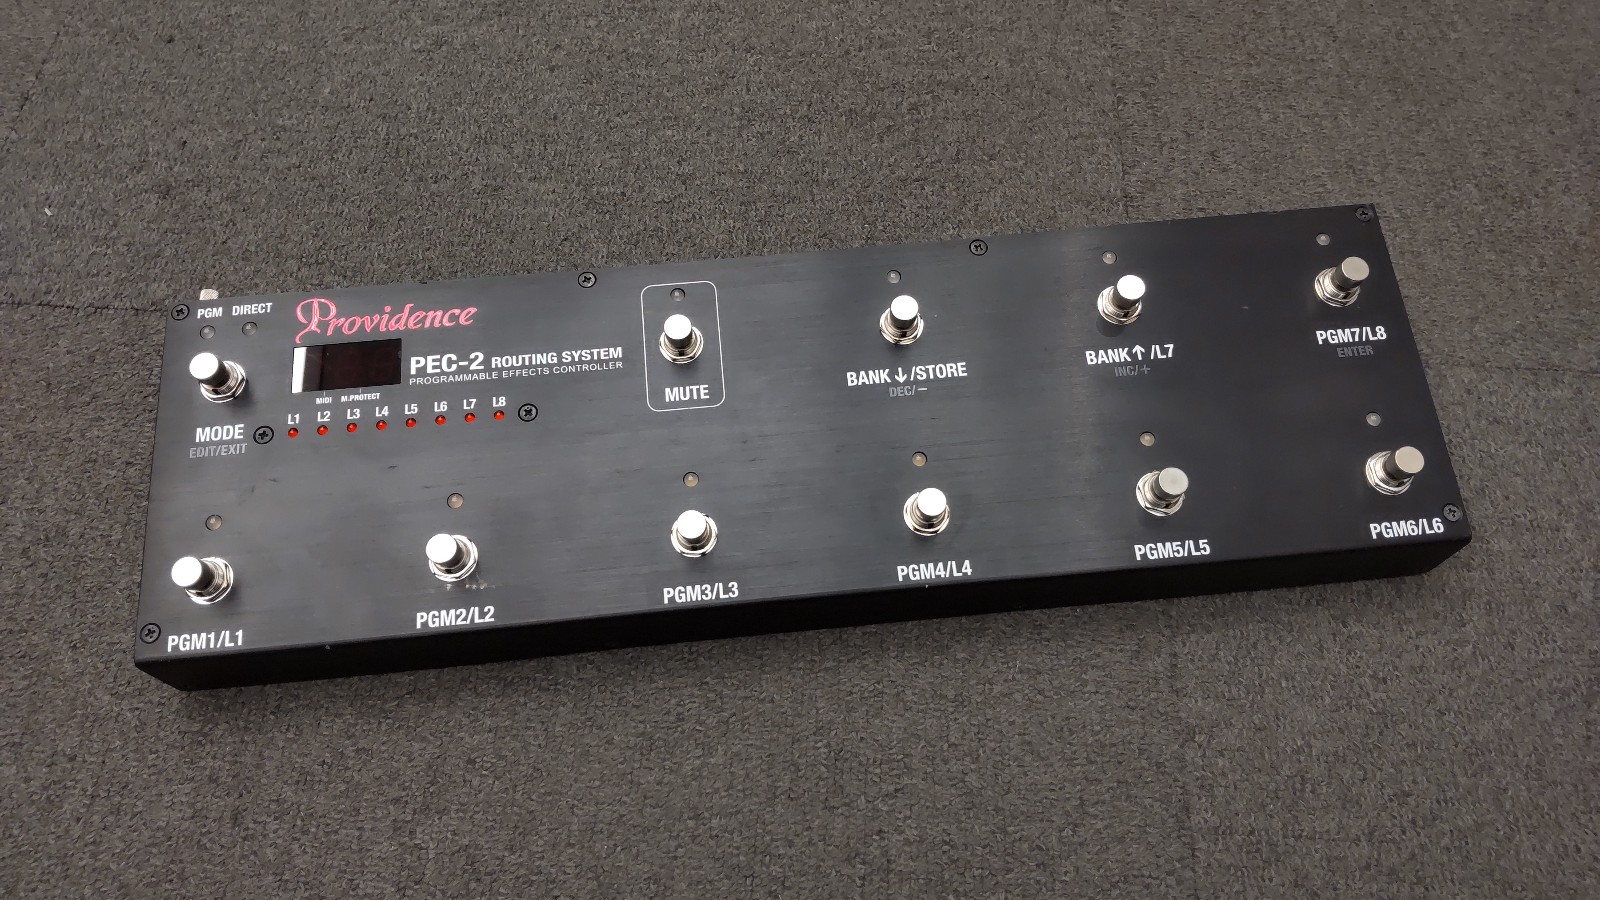 ProvidencePEC-2 routing system【プログラマブルスイッチャー】商品 ...